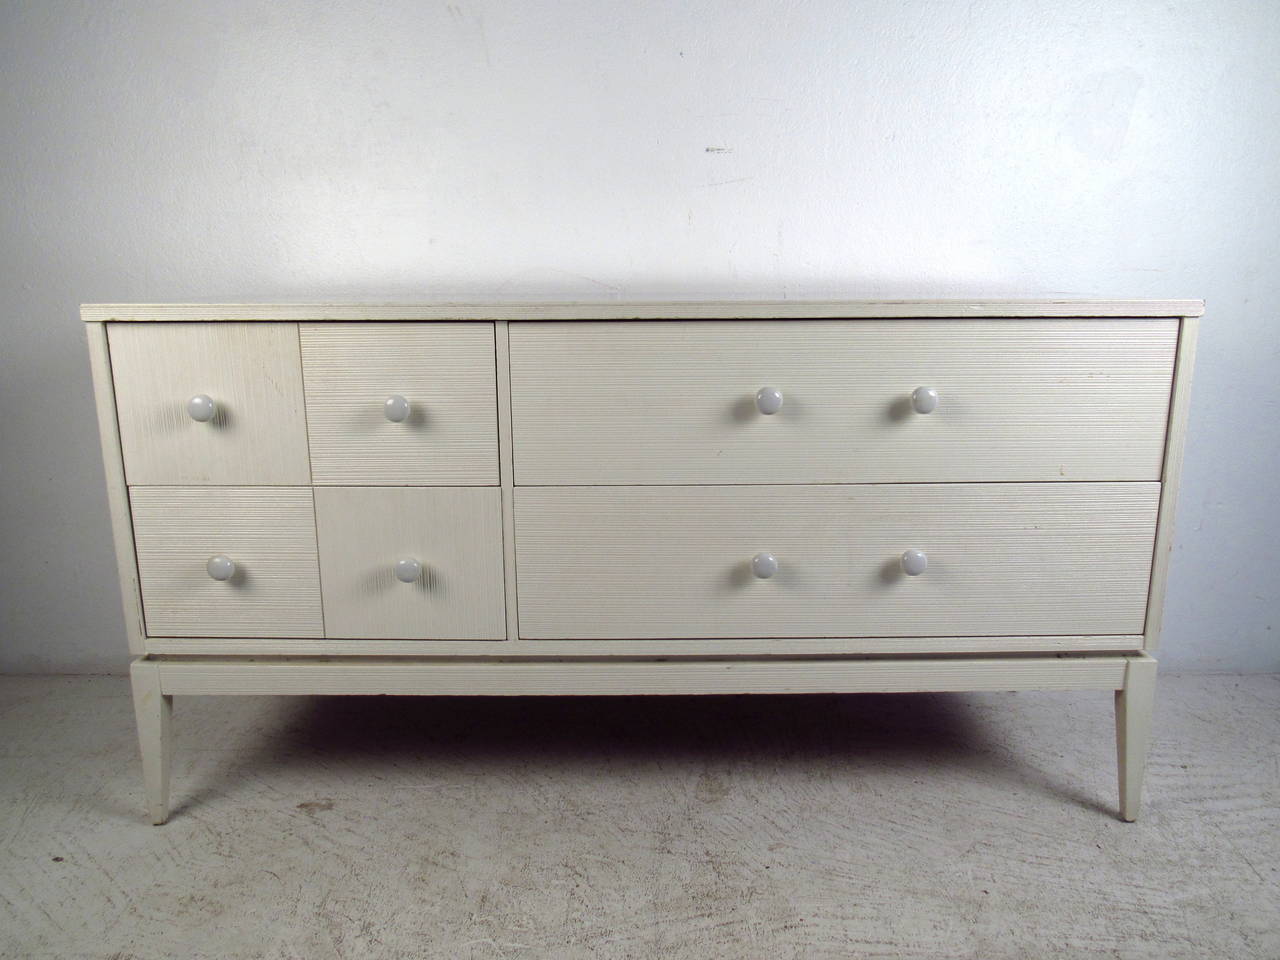 This mid century dresser features a textured white finish, durable laminate top, tapered legs and unique white drawer pulls which offer a modern flare and ample storage to any home or office.

Please confirm item location (NY or NJ) with dealer.